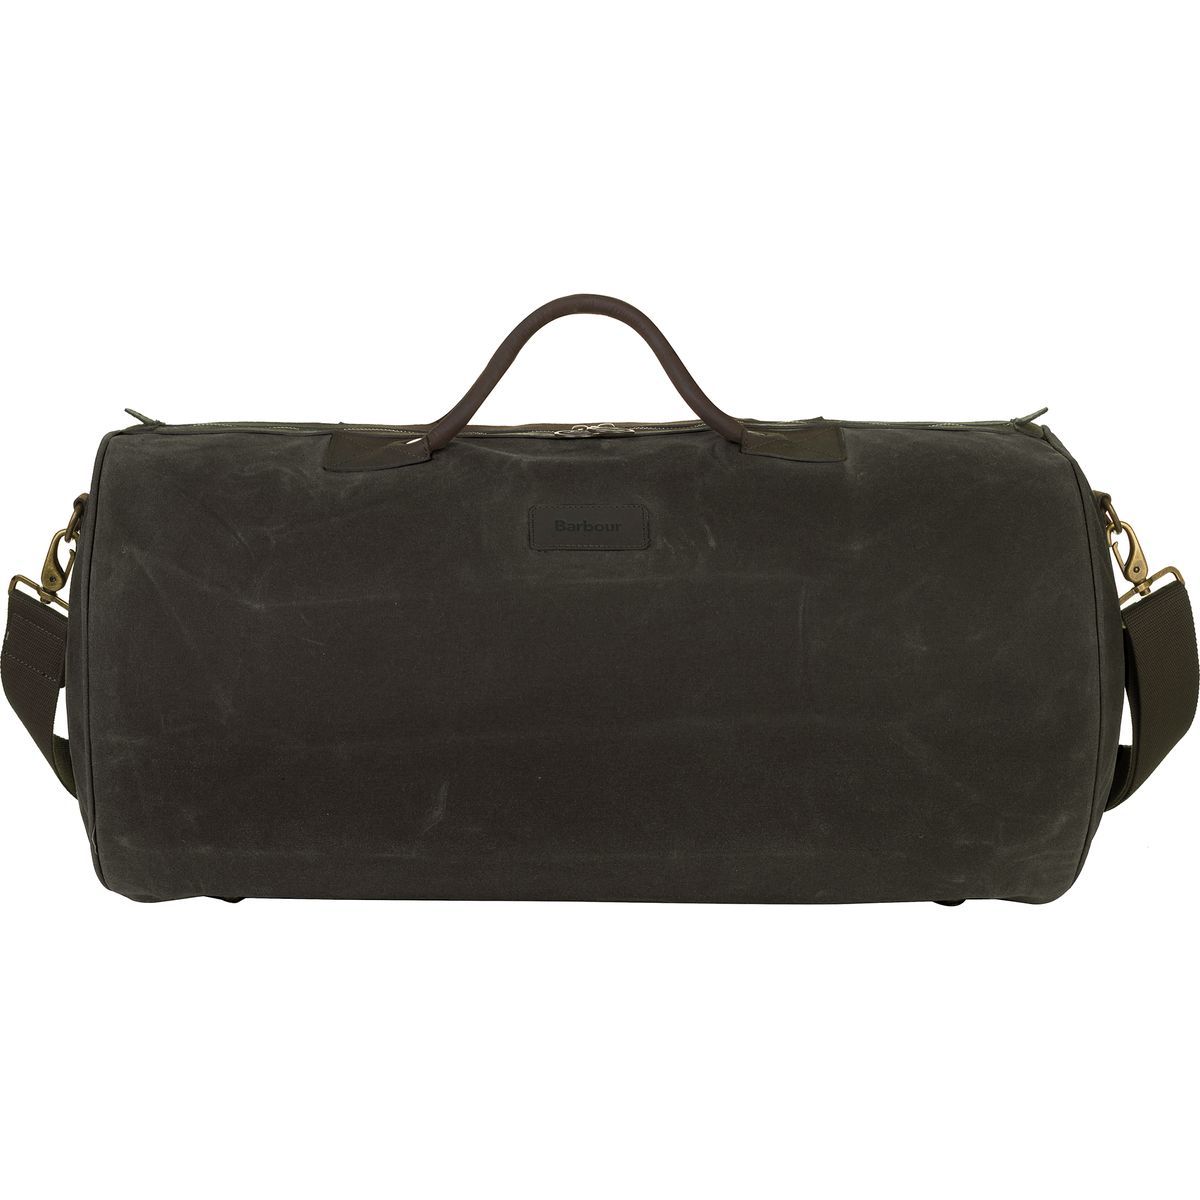 Barbour Wax Holdall Duffel